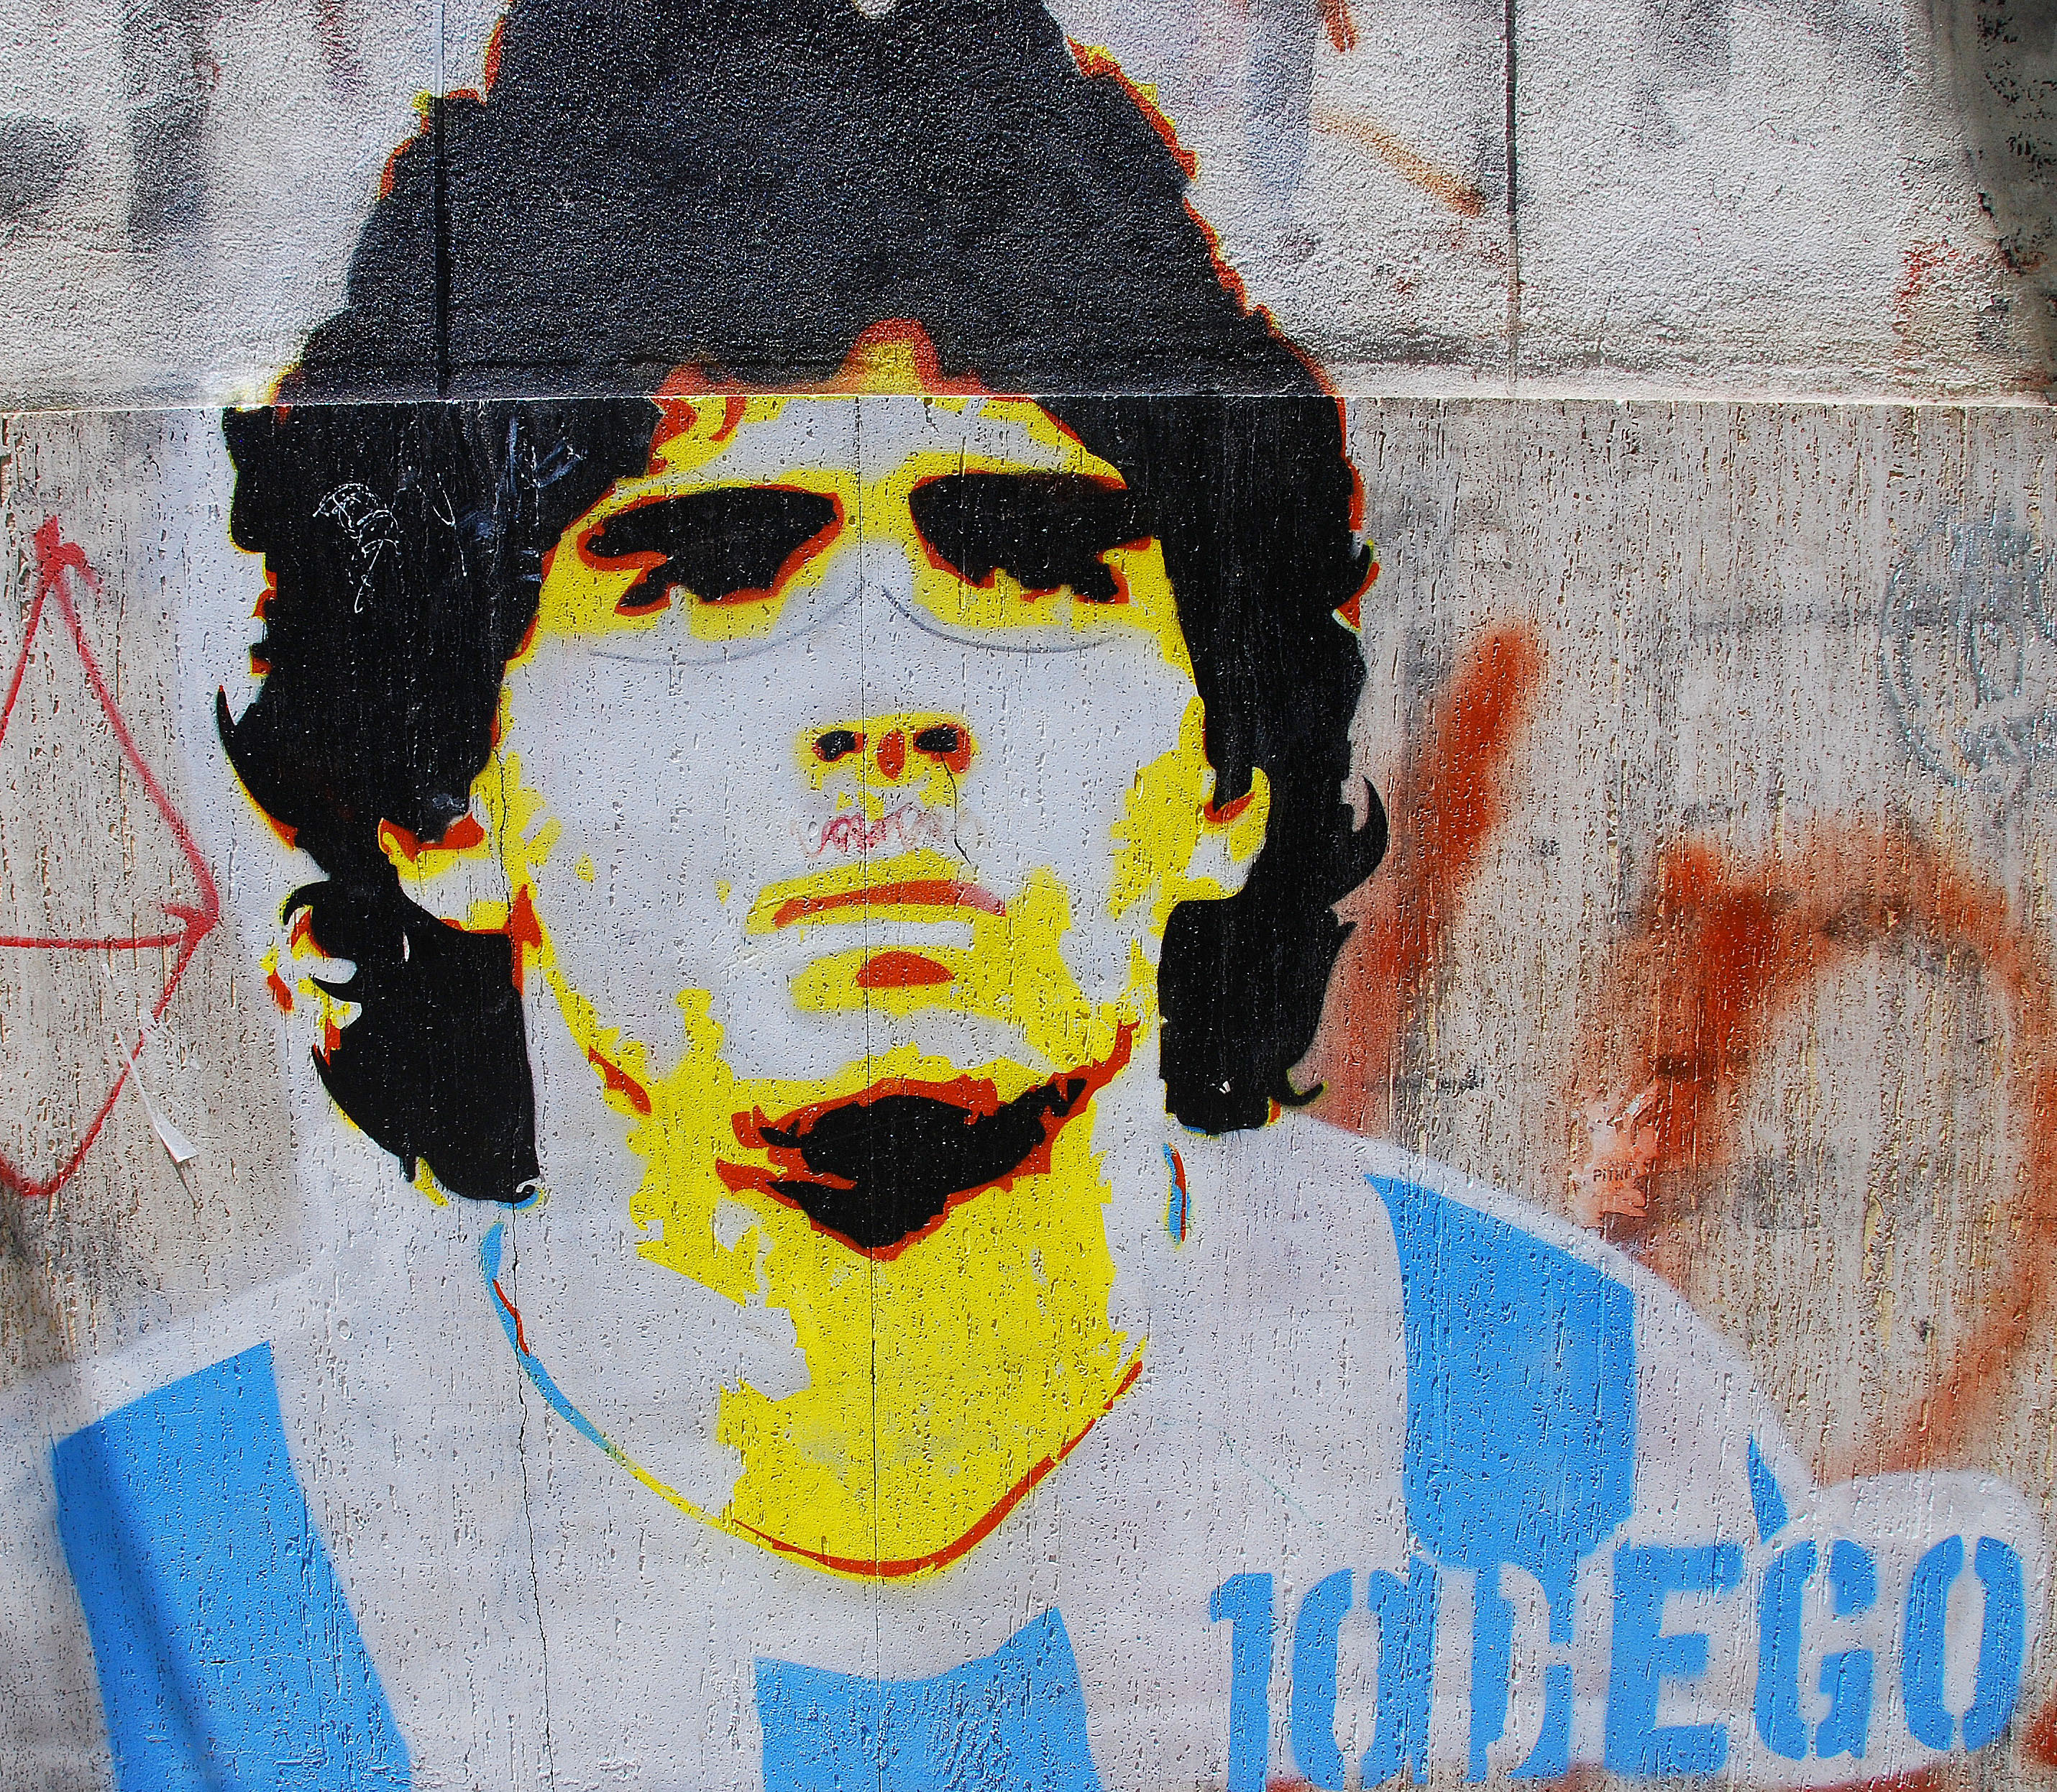 Diego Maradona – A Tribute To The World’s Number 10.